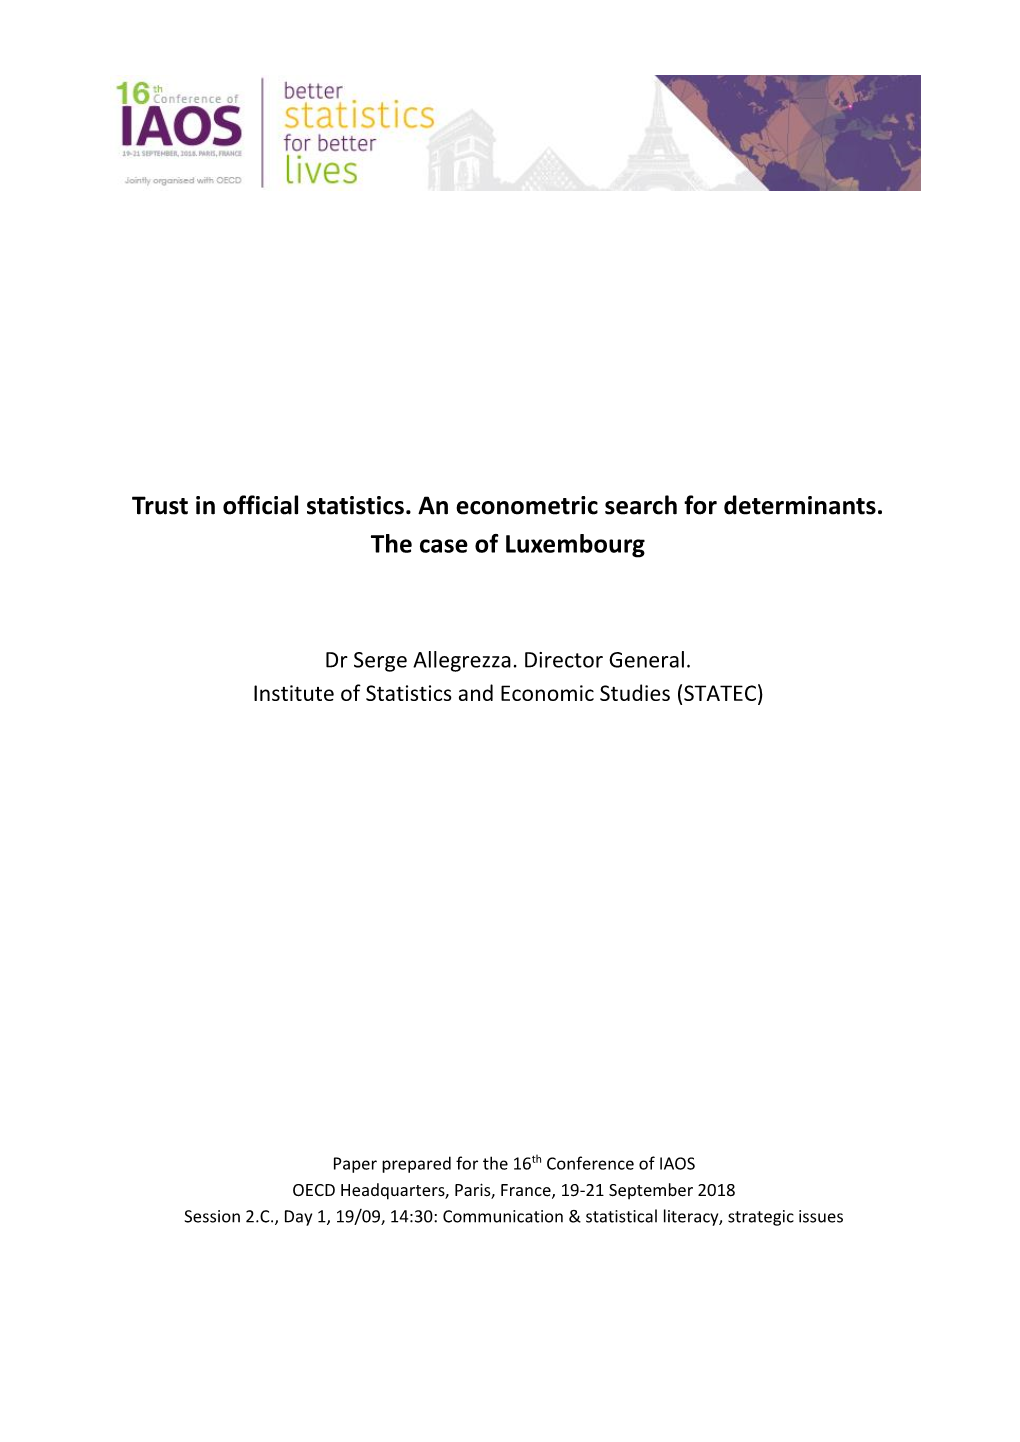 Trust in Official Statistics. an Econometric Search for Determinants